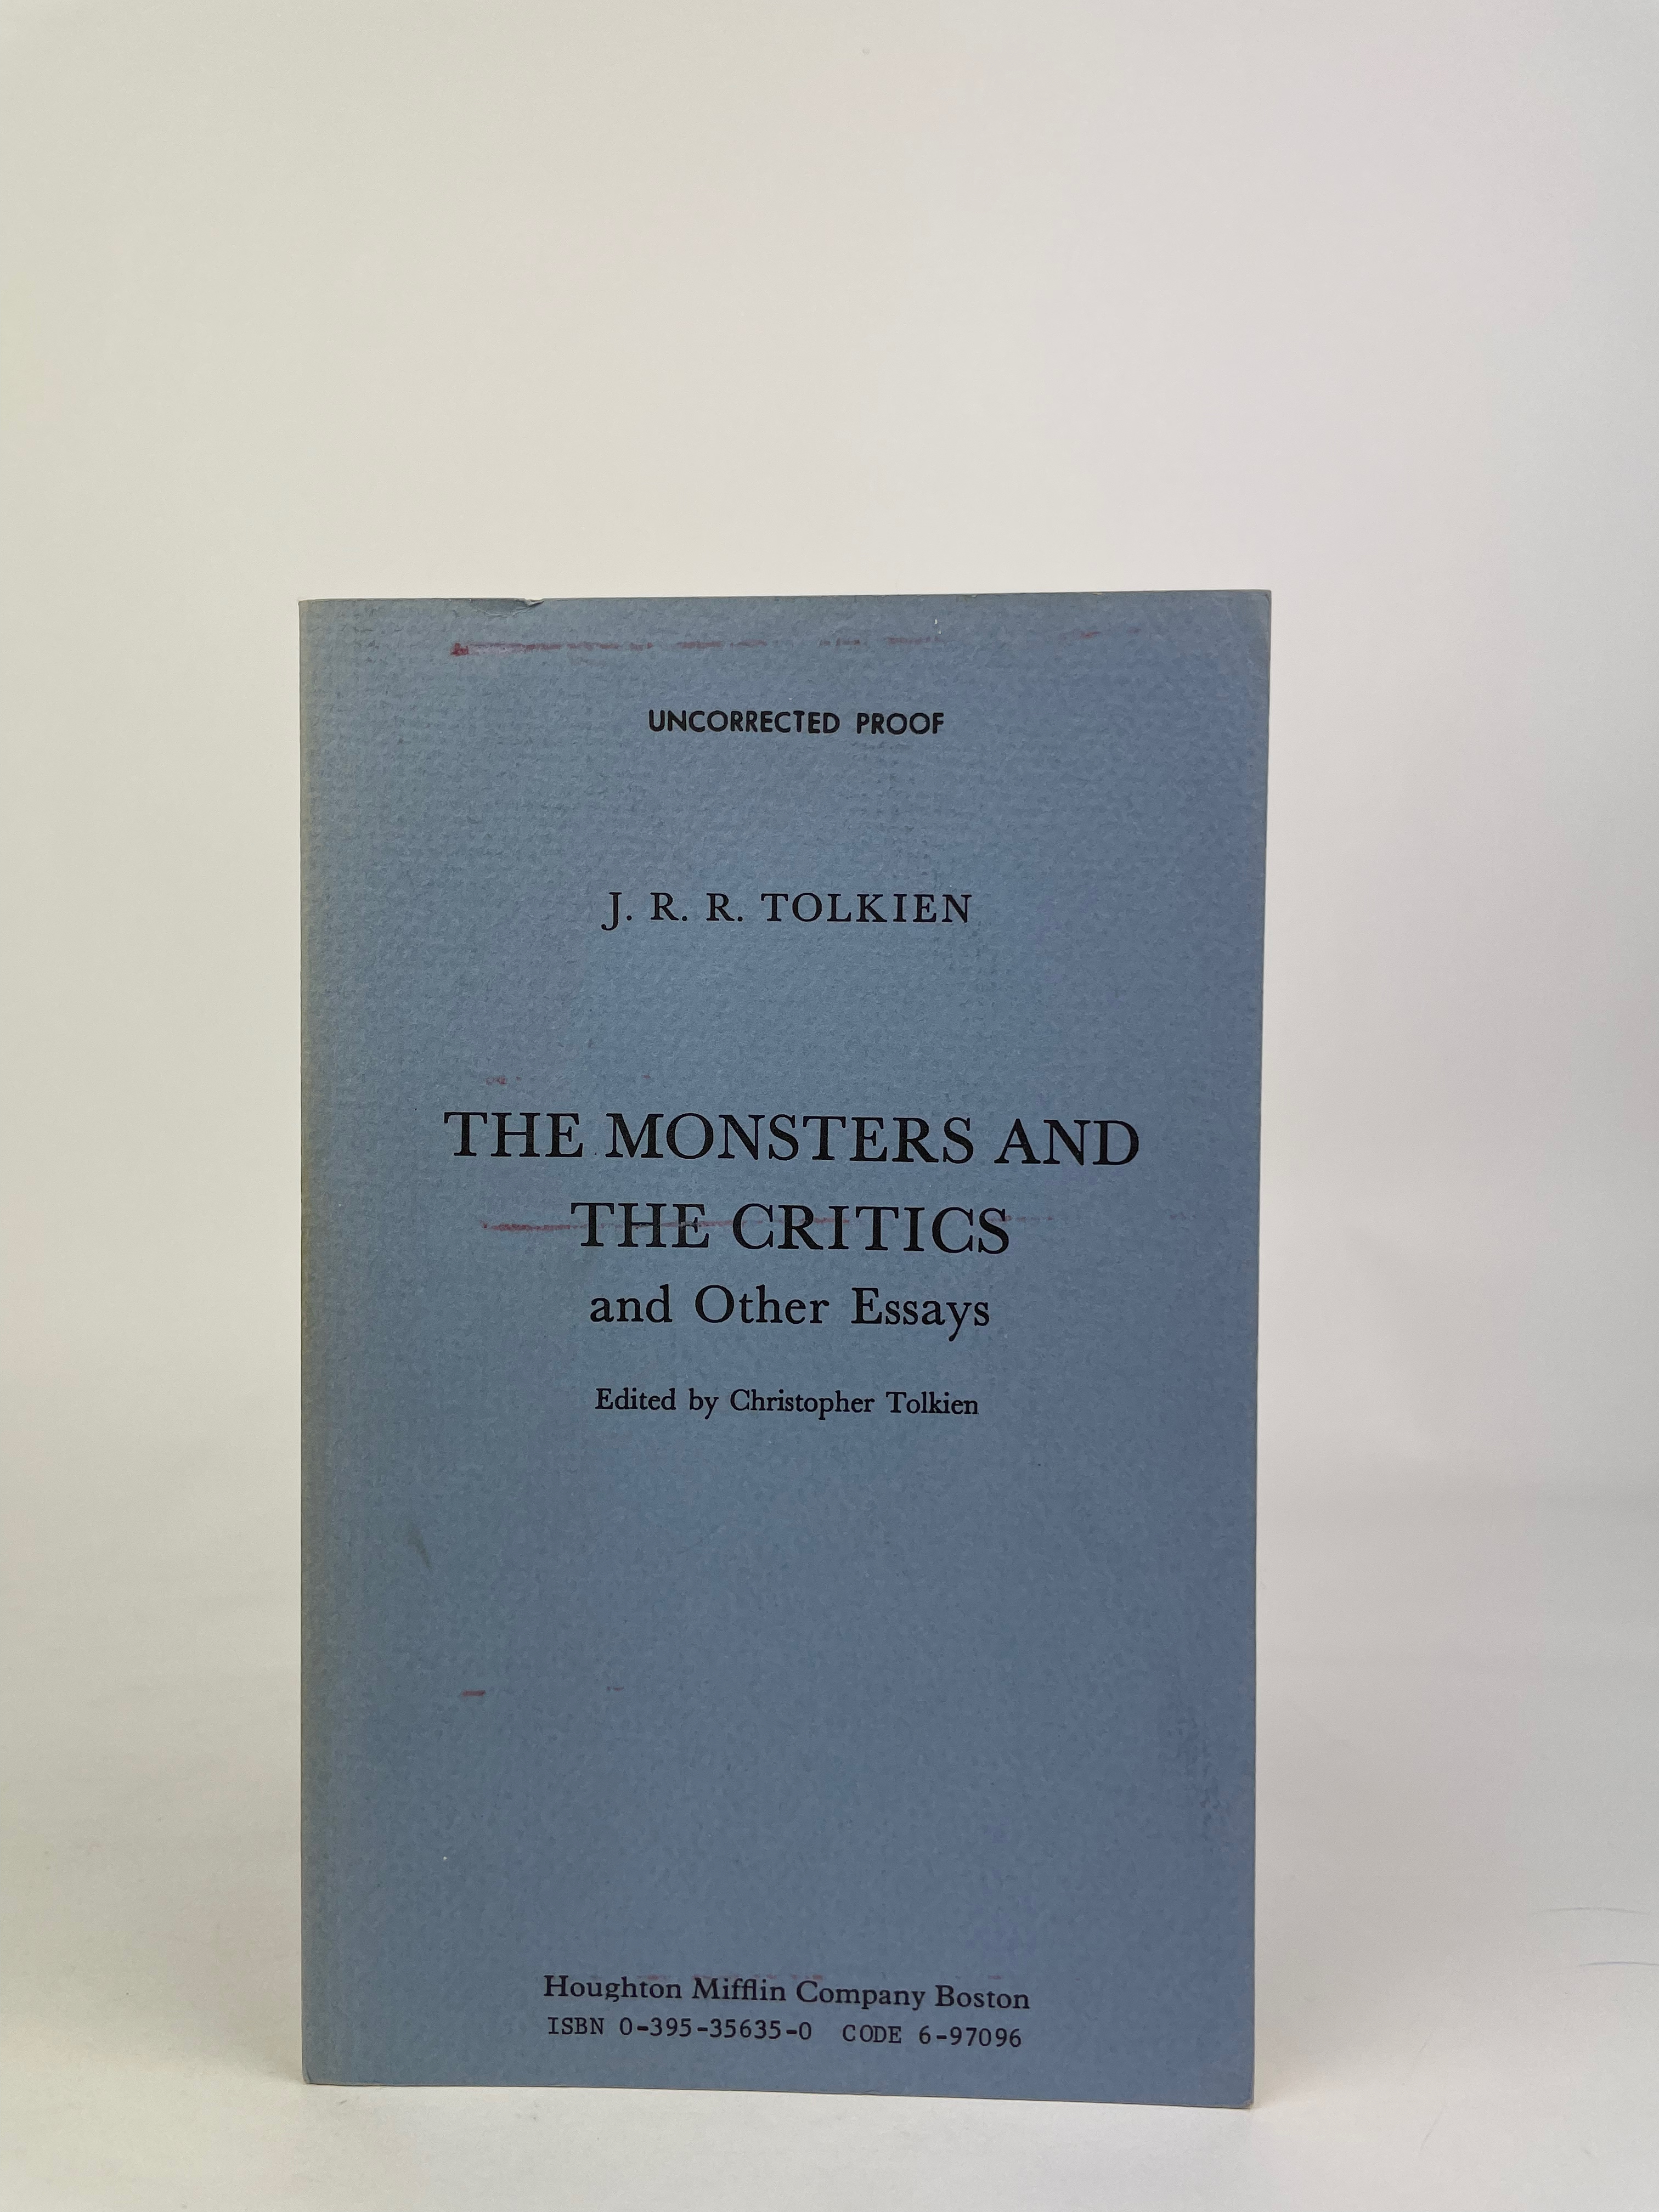 Advance Uncorrected Proof of The Monsters and the Critics, and Other Essays by J.R.R. Tolkien edited by Christopher Tolkien